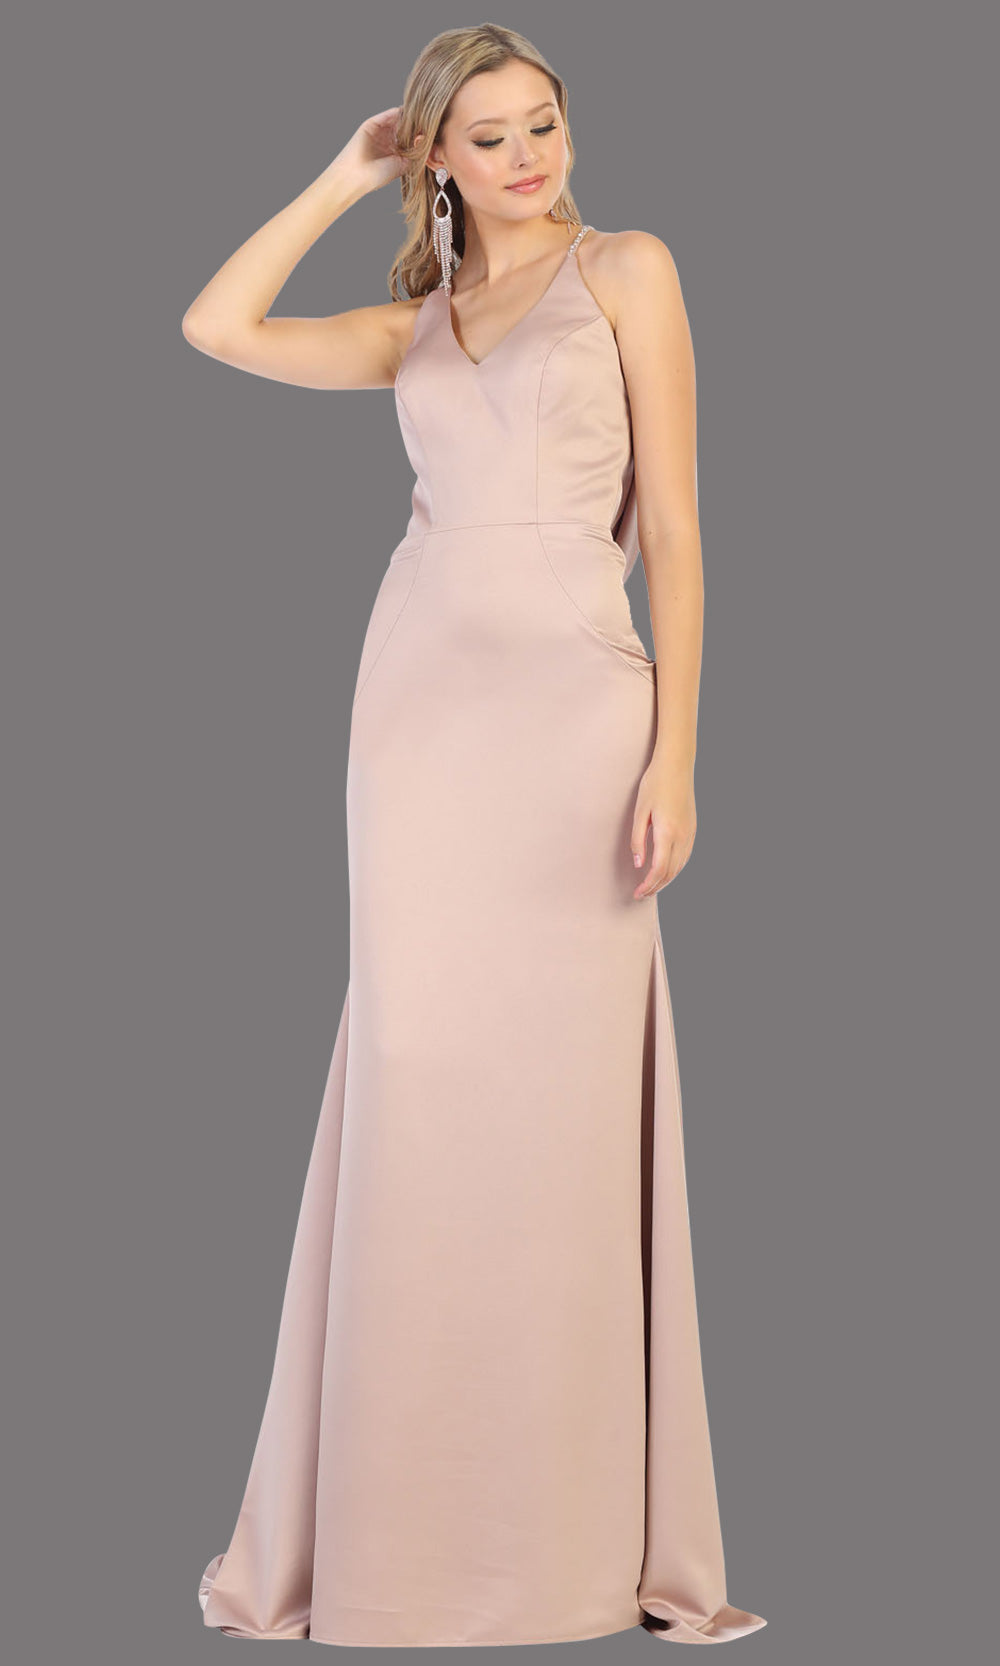 Mayqueen MQ1779 long taupe v neck fitted satin dress with open back & train. Perfect for prom, engagement dress, e-shoot dress, formal wedding guest dress, gala. Plus sizes avail in this taupe sleek & sexy dress.jpg